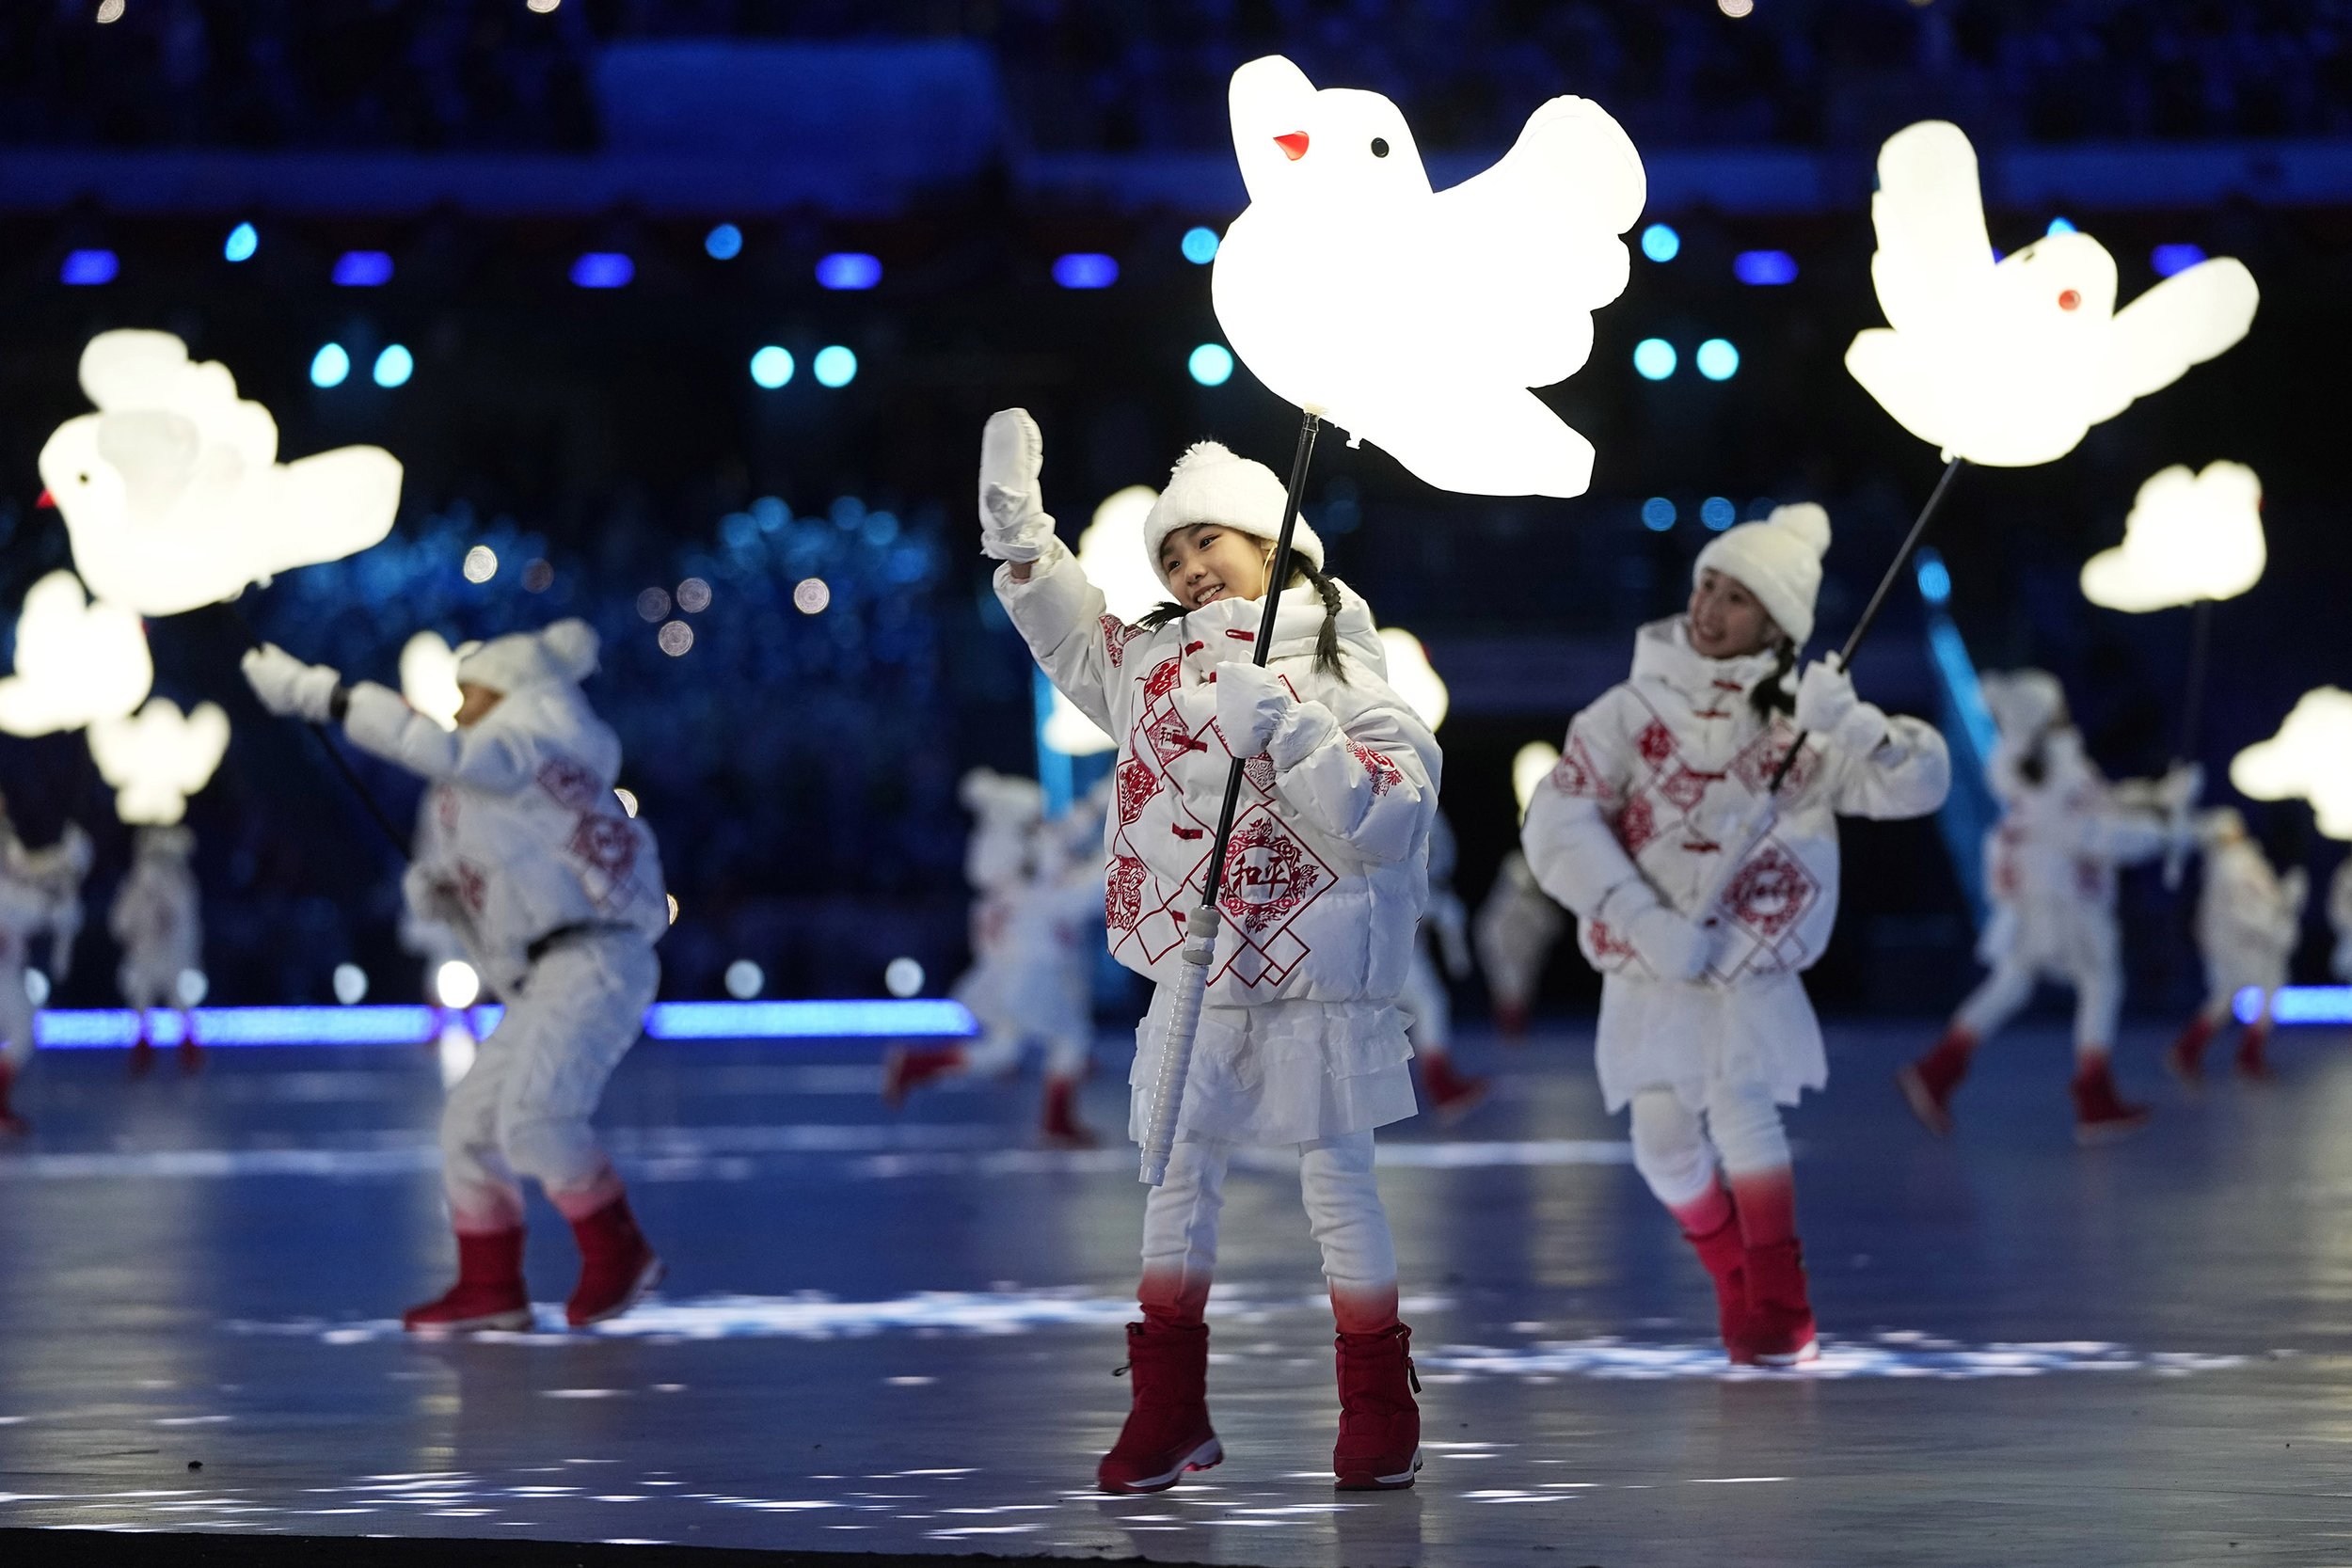  Children perform during the opening ceremony of the 2022 Winter Olympics, Friday, Feb. 4, 2022, in Beijing. (AP Photo/Jae C. Hong) 